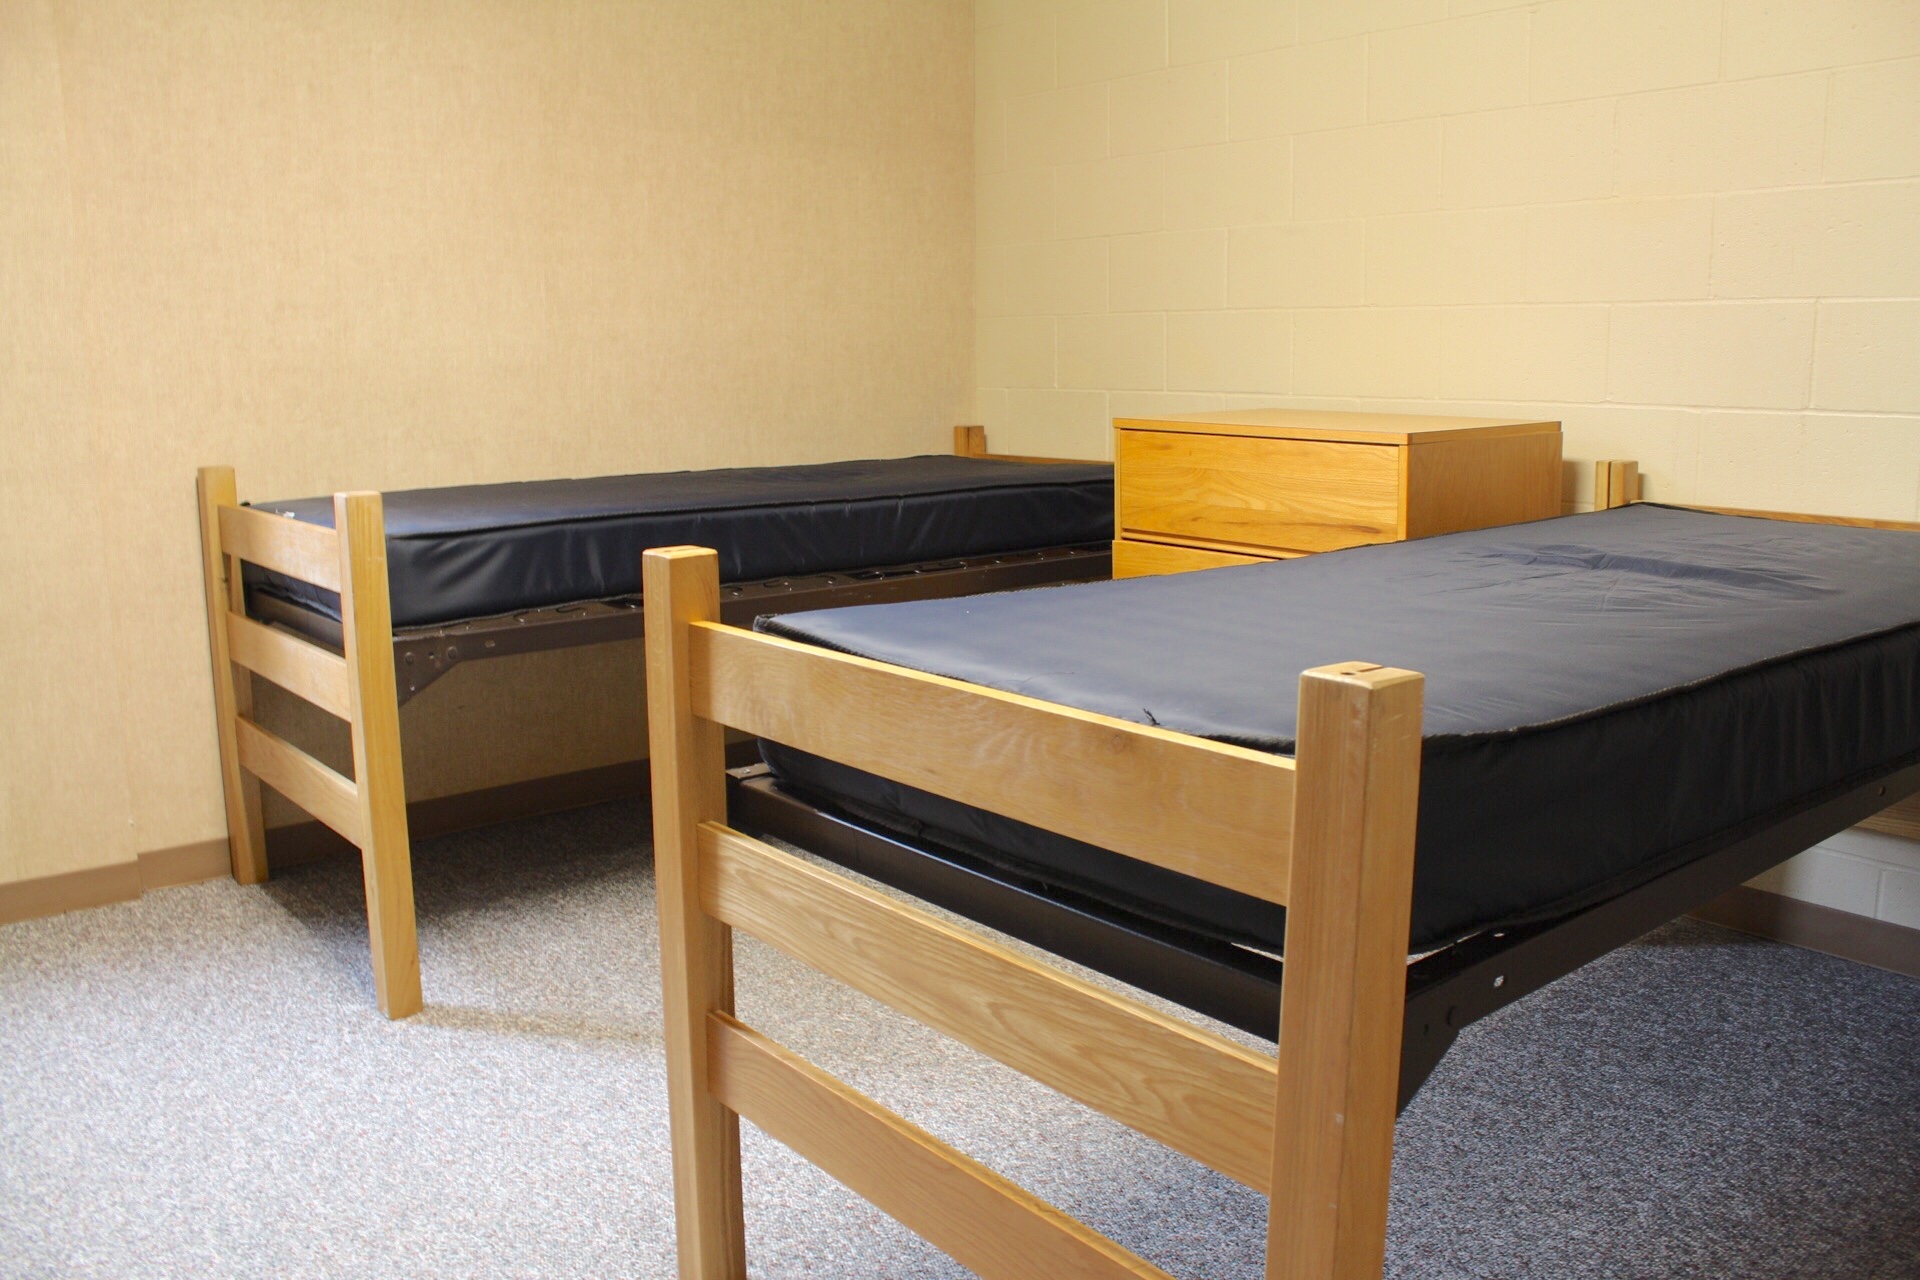 Centennial Complex room with 2 bed frames, mattresses and a dresser placed between them.